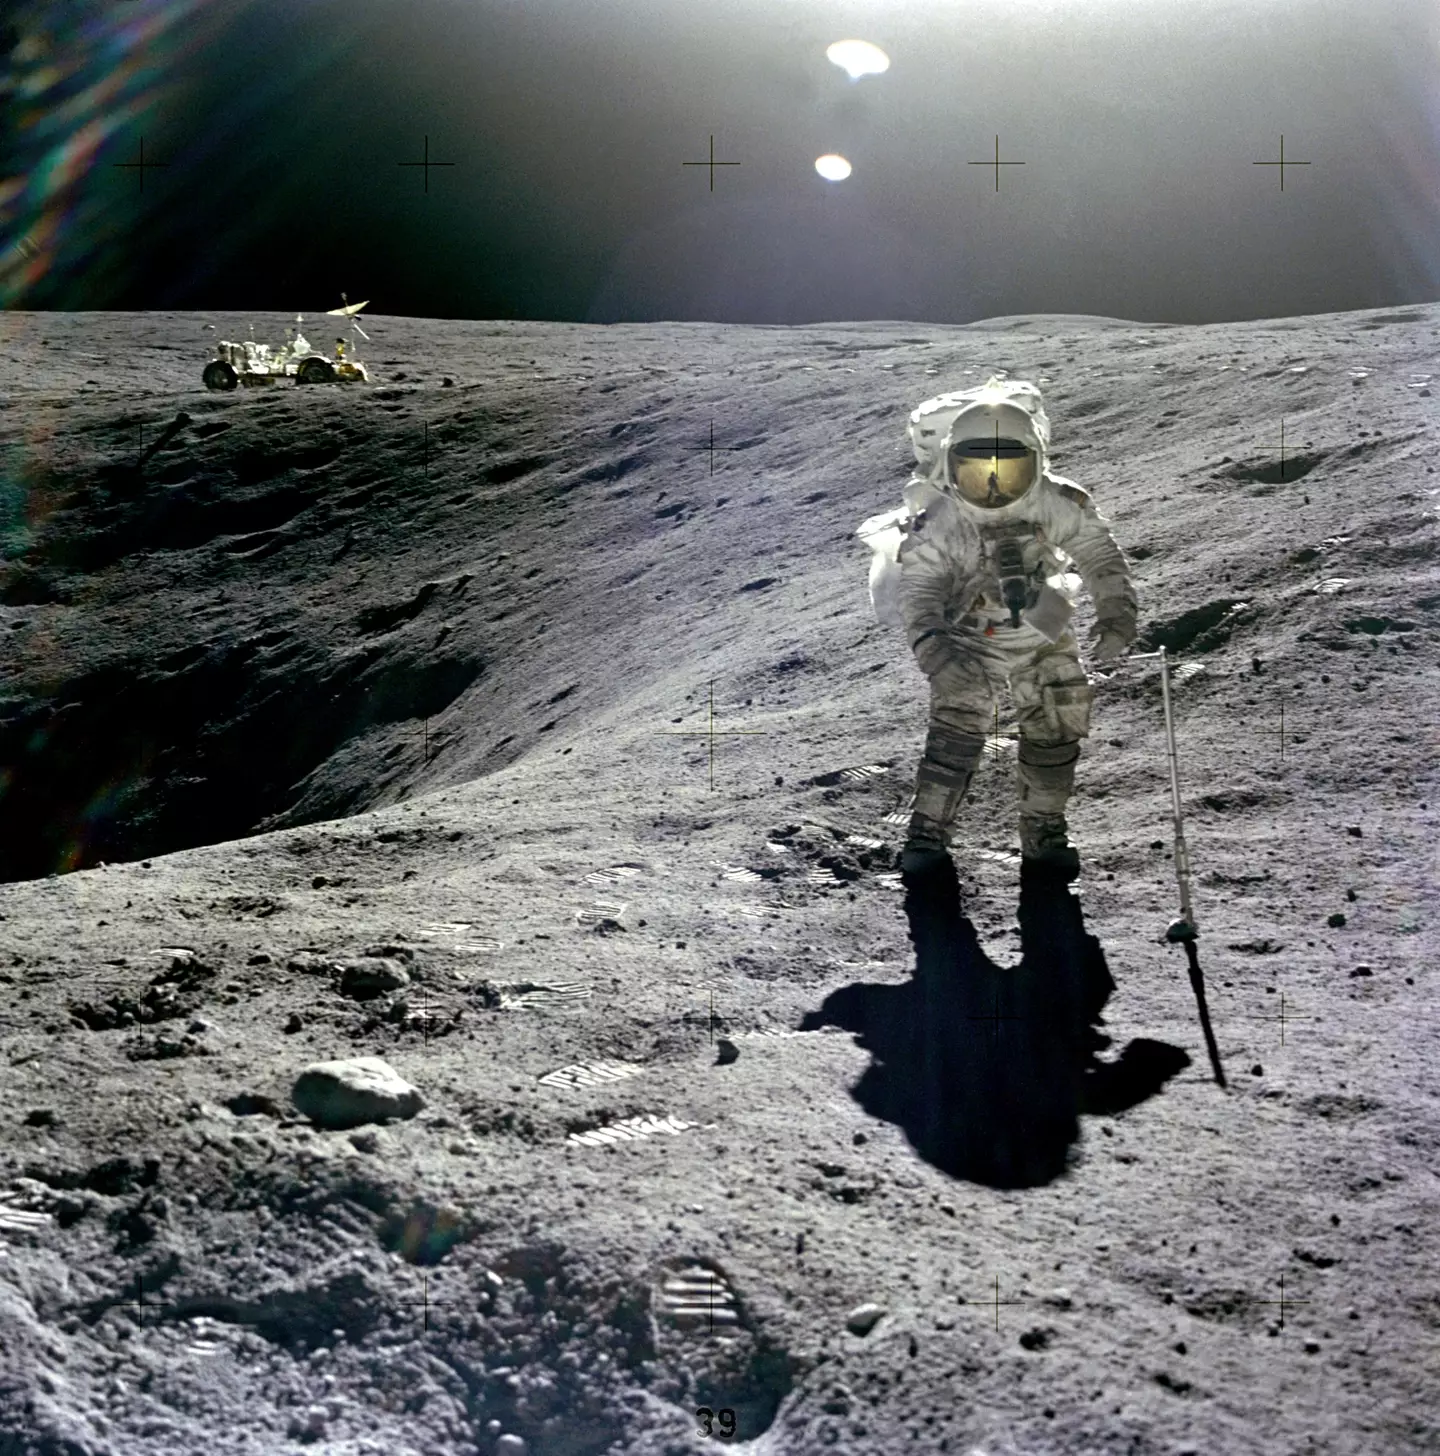 Charles Duke on the surface of the Moon.